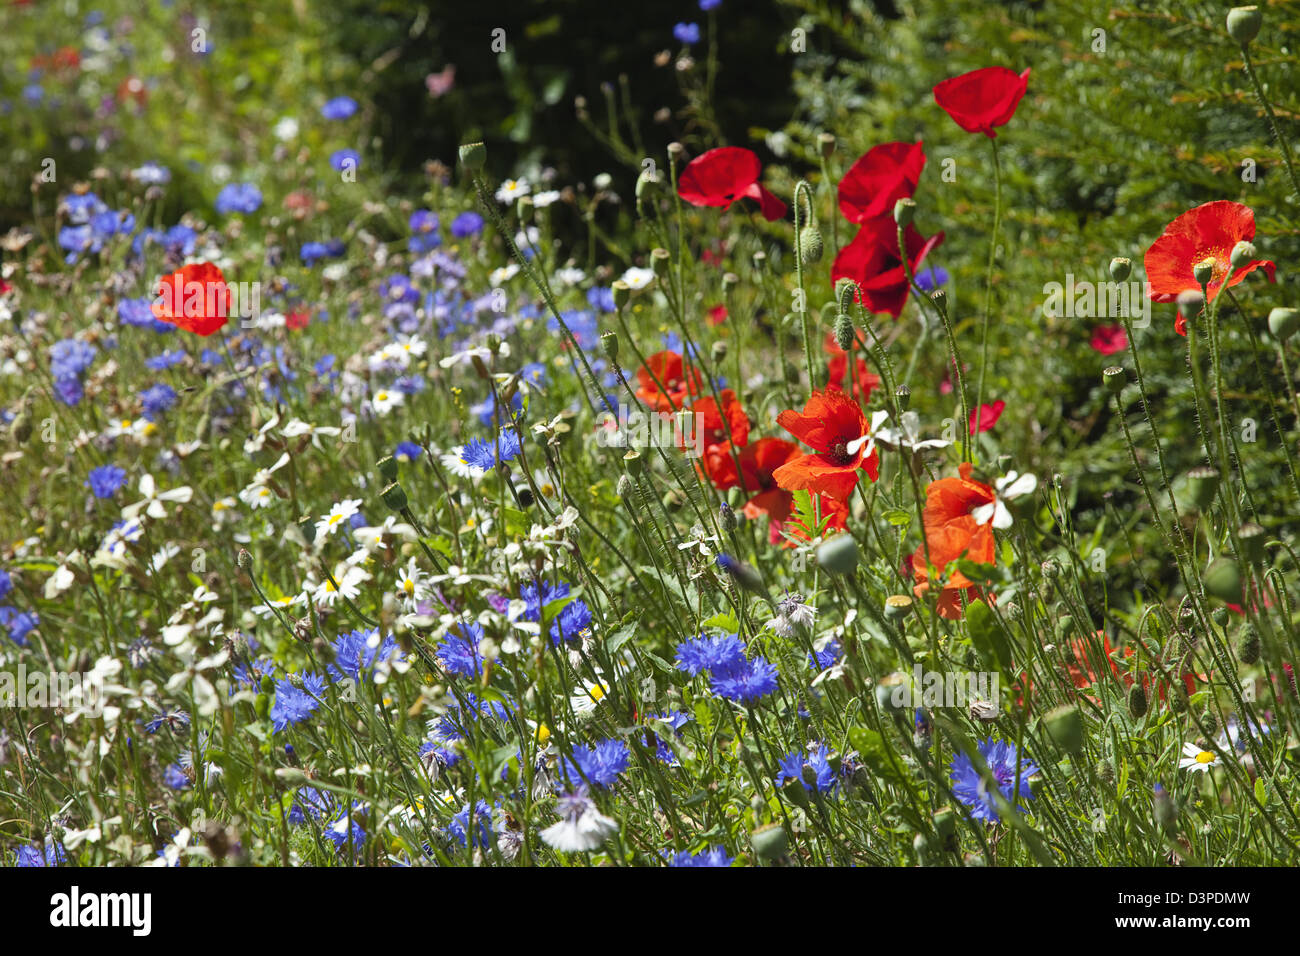 Meadow of mixed wild flowers with Cornflower, Daisies and Poppies. Stock Photo